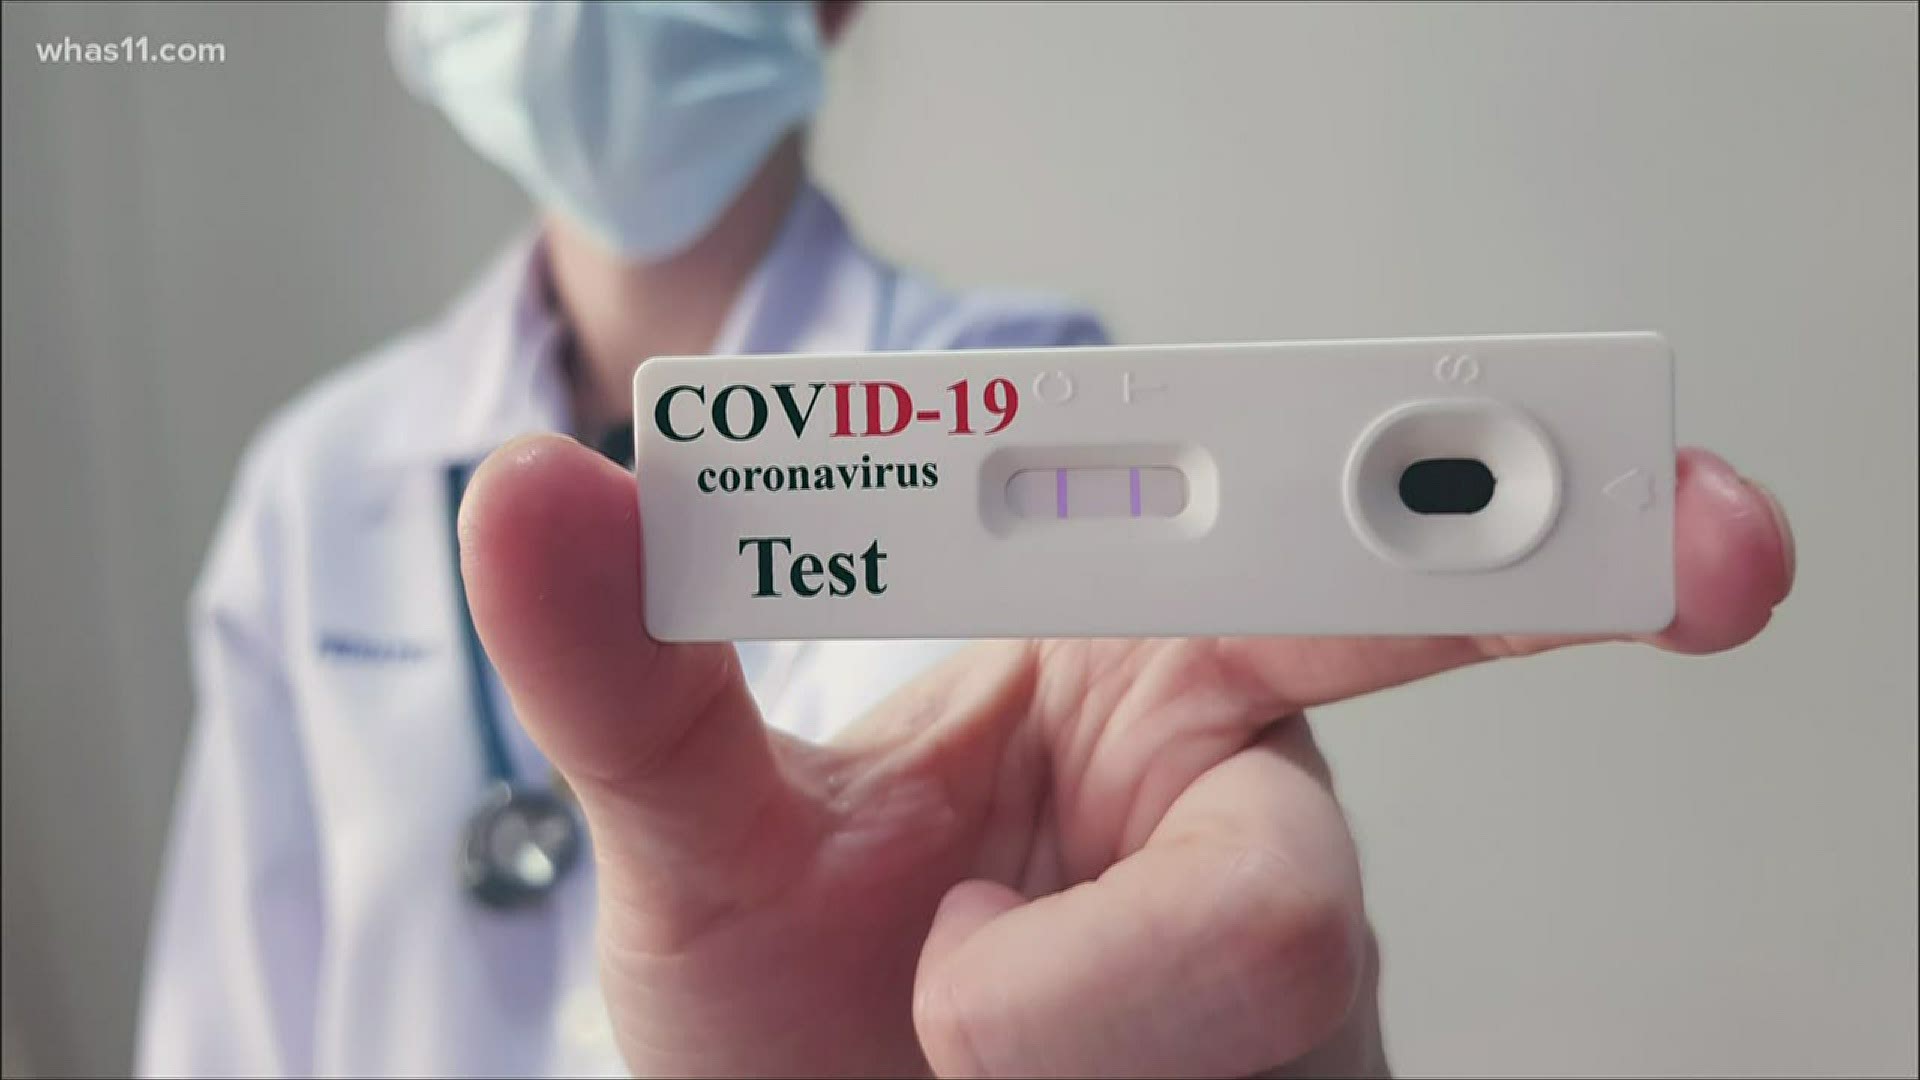 The CDC says two different kinds of tests are available specific to covid 19 antibody tests that tell you if you've BEEN infected, and viral tests that tell you